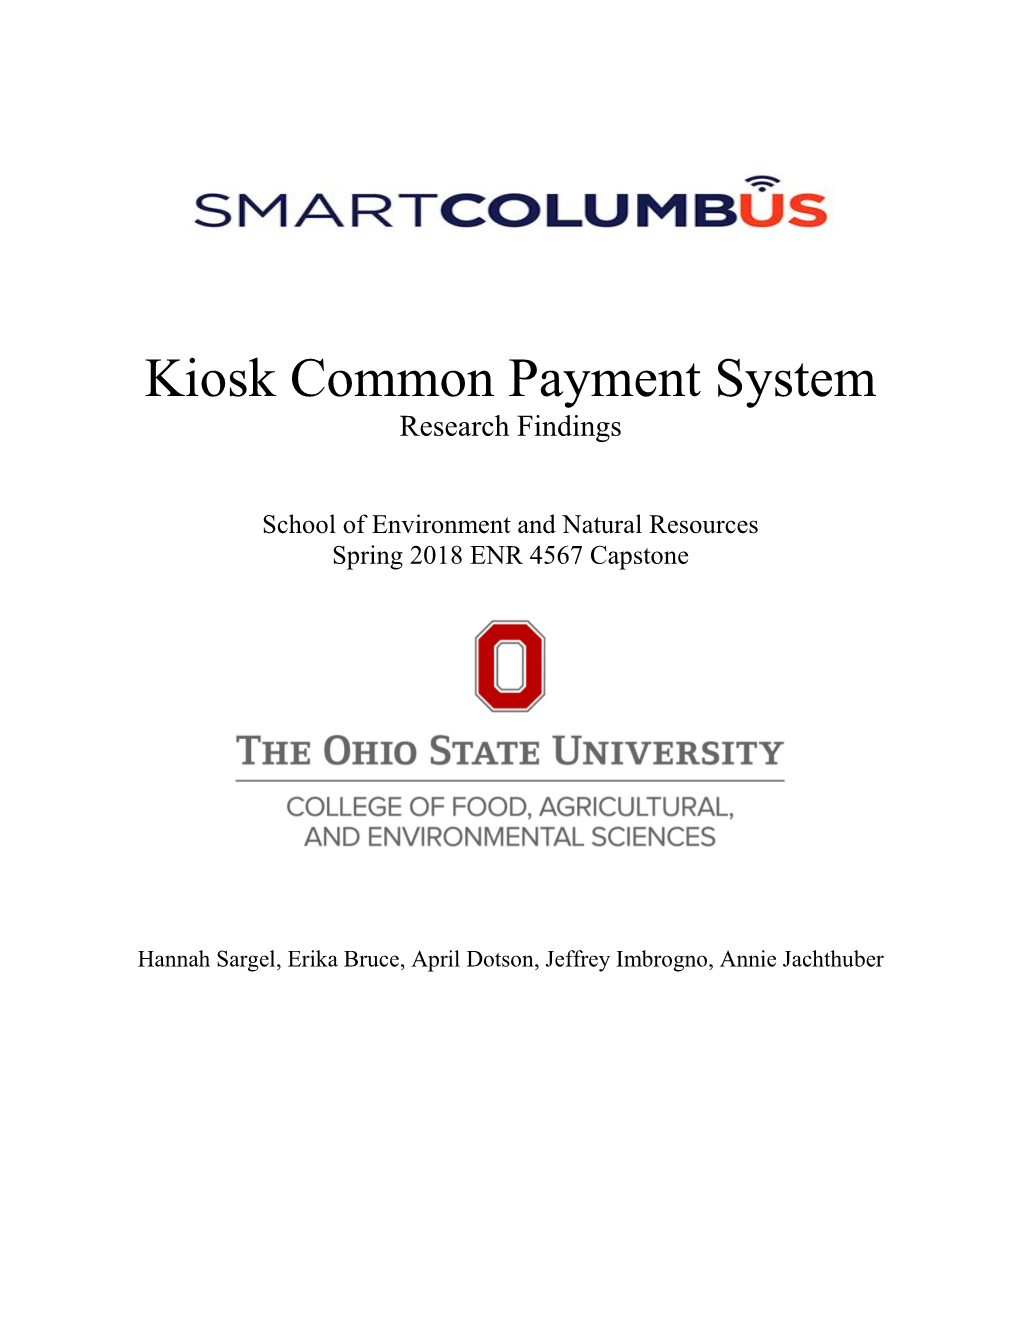 Kiosk Common Payment System Research Findings